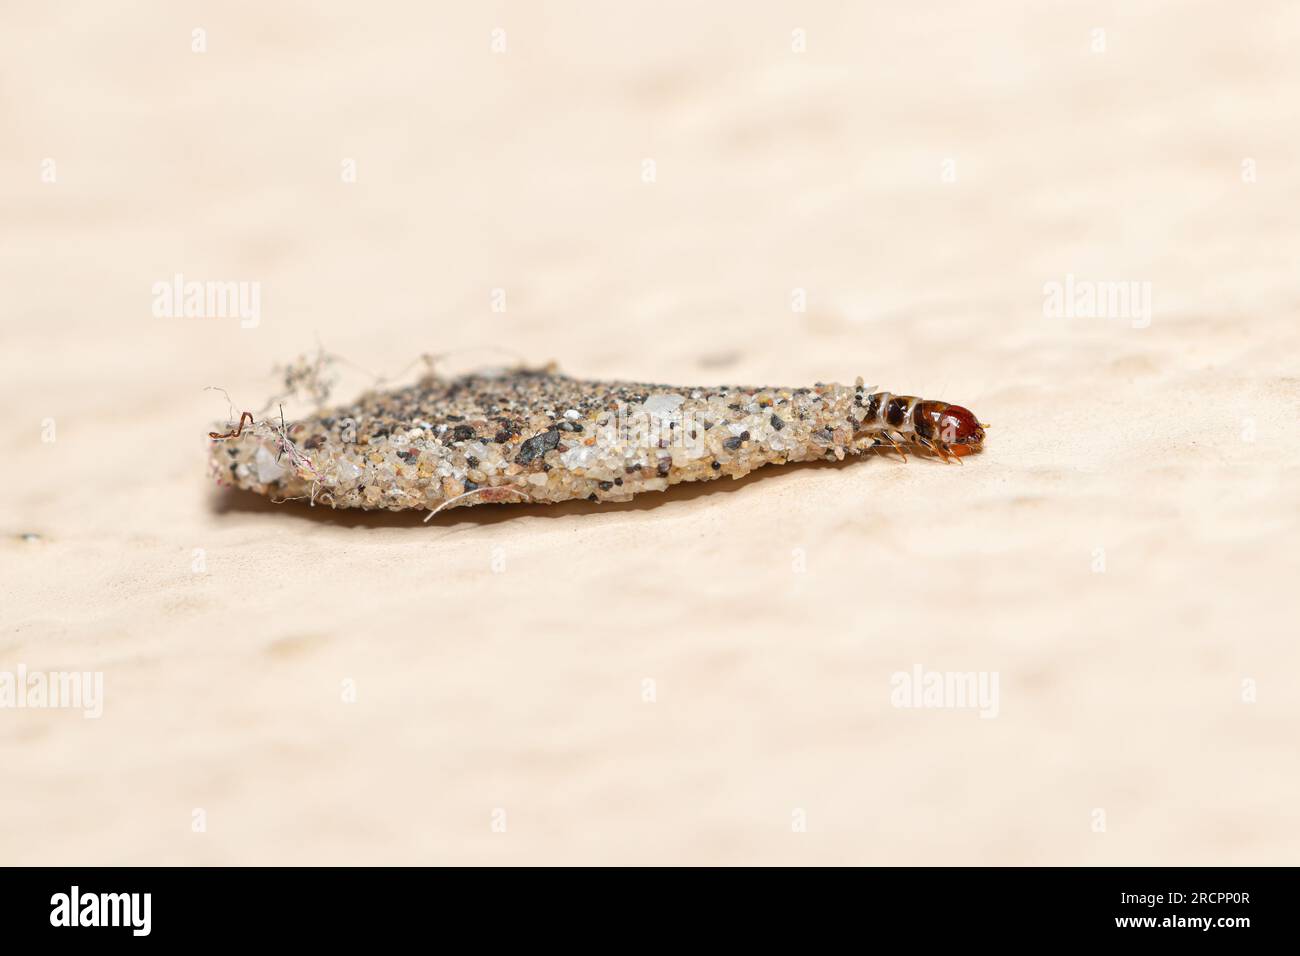 Closeup bagworms (tineidae) from Southeast Asia Stock Photo